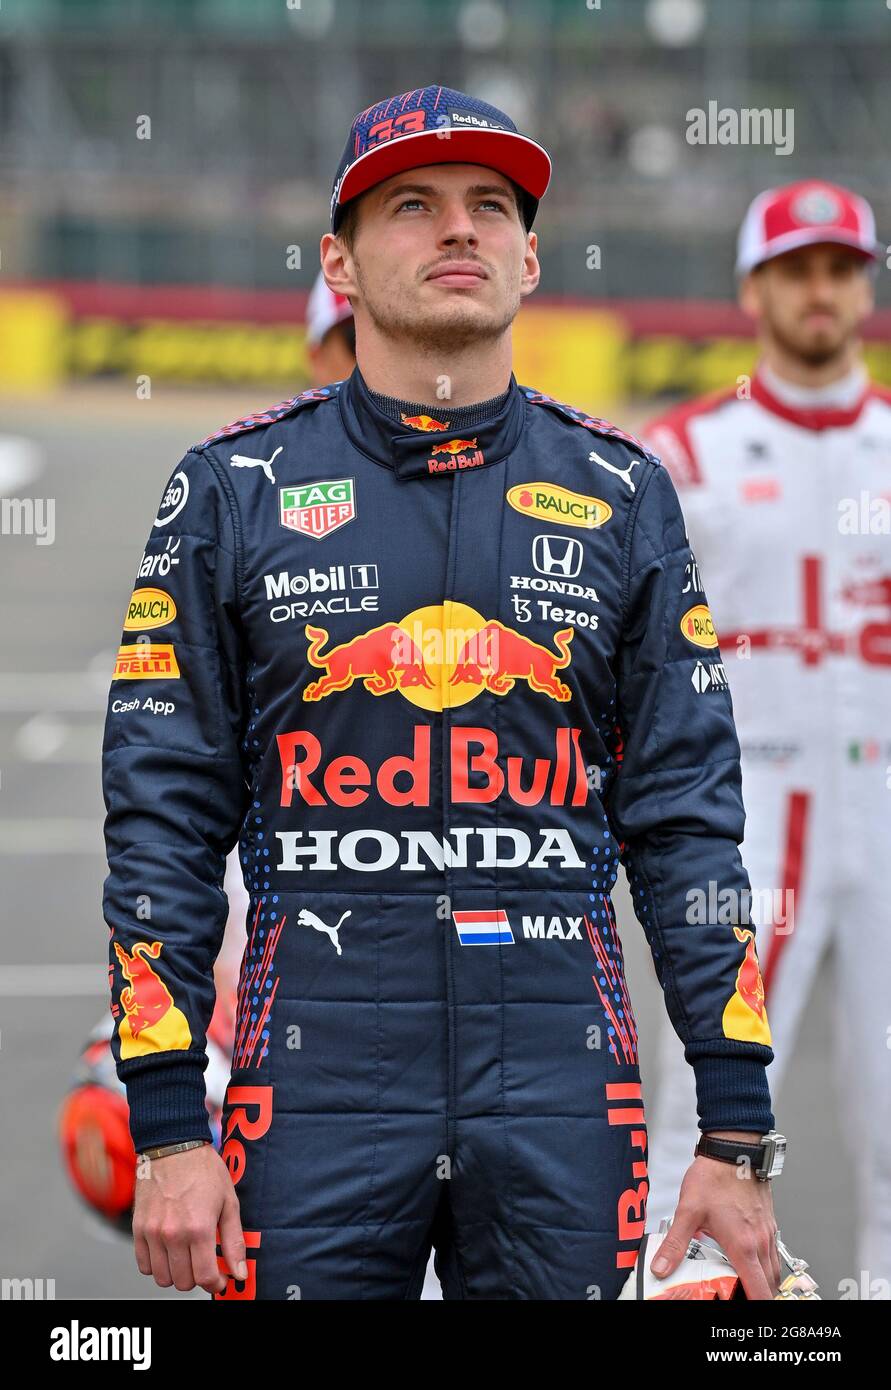 Silverstone, UK. 15th July, 2021. # 33 Max Verstappen (NED, Red Bull  Racing), F1 Grand Prix of Great Britain at Silverstone Circuit on July 15,  2021 in Silverstone, United Kingdom. (Photo by